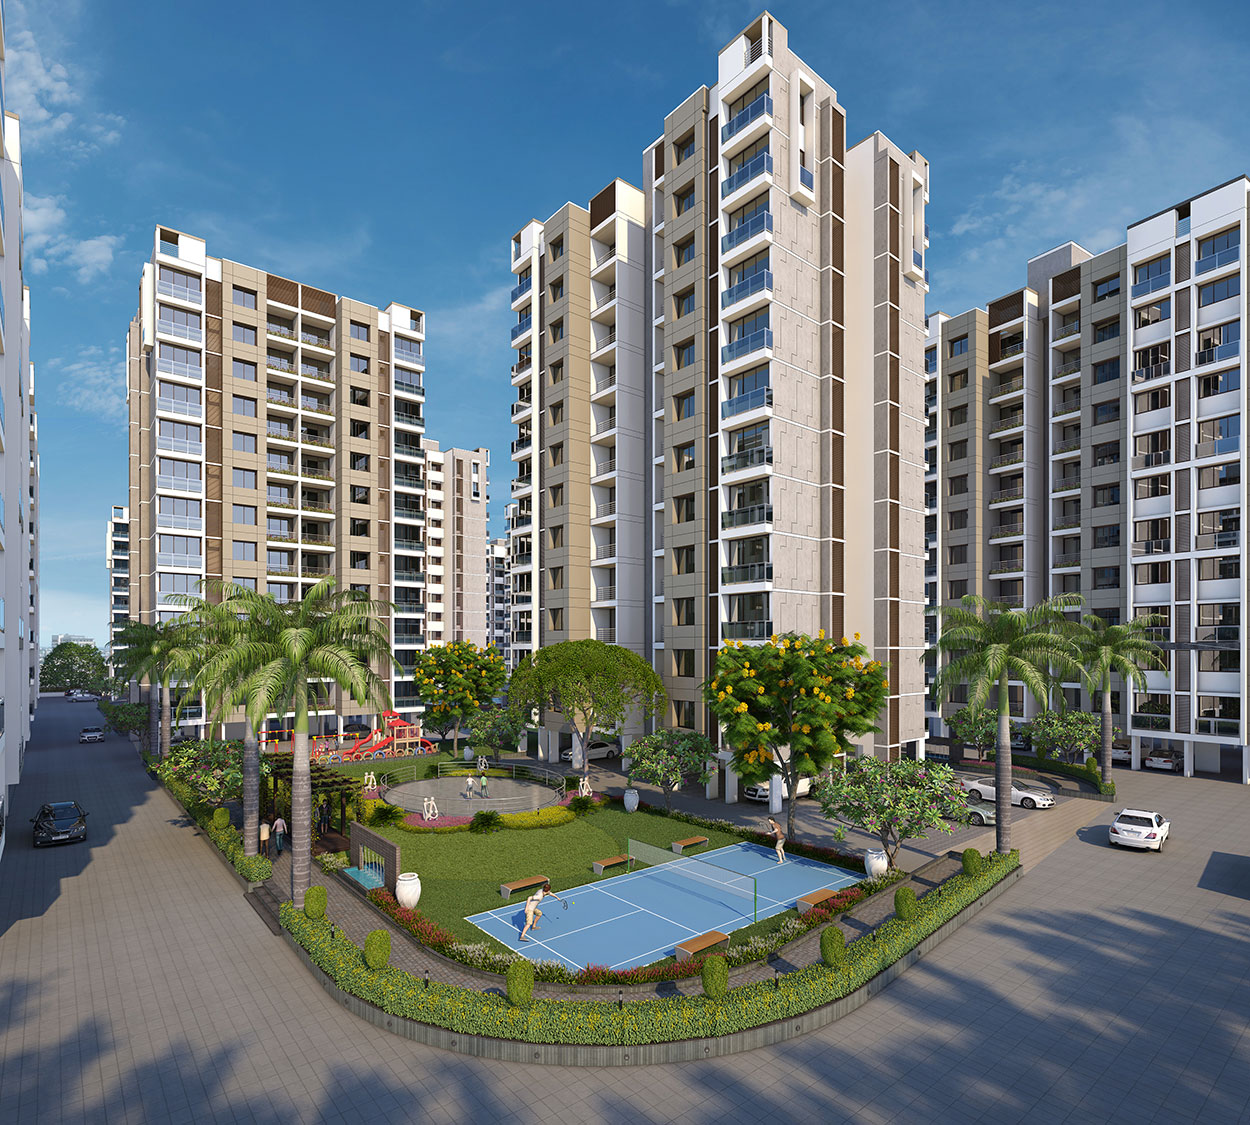 Swaminarayan Green City in Surat - Dharmadev Infrastructure Limited